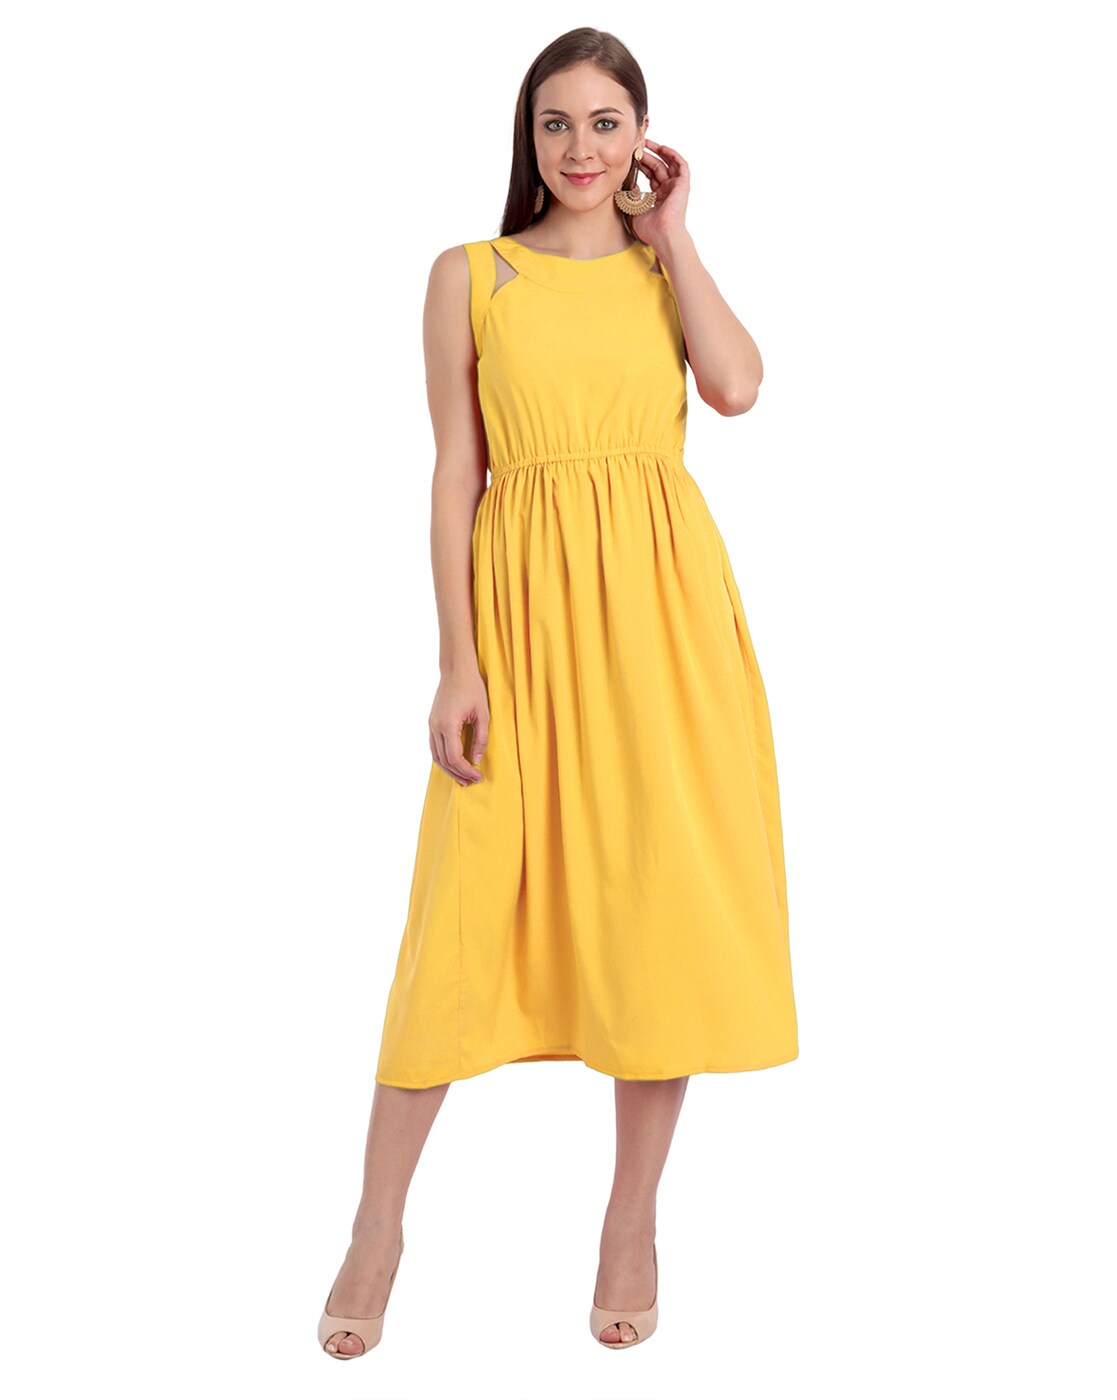 LINDONG | Mira Yellow One-Piece Suit Dress | One piece suit, Yellow one  piece, One piece